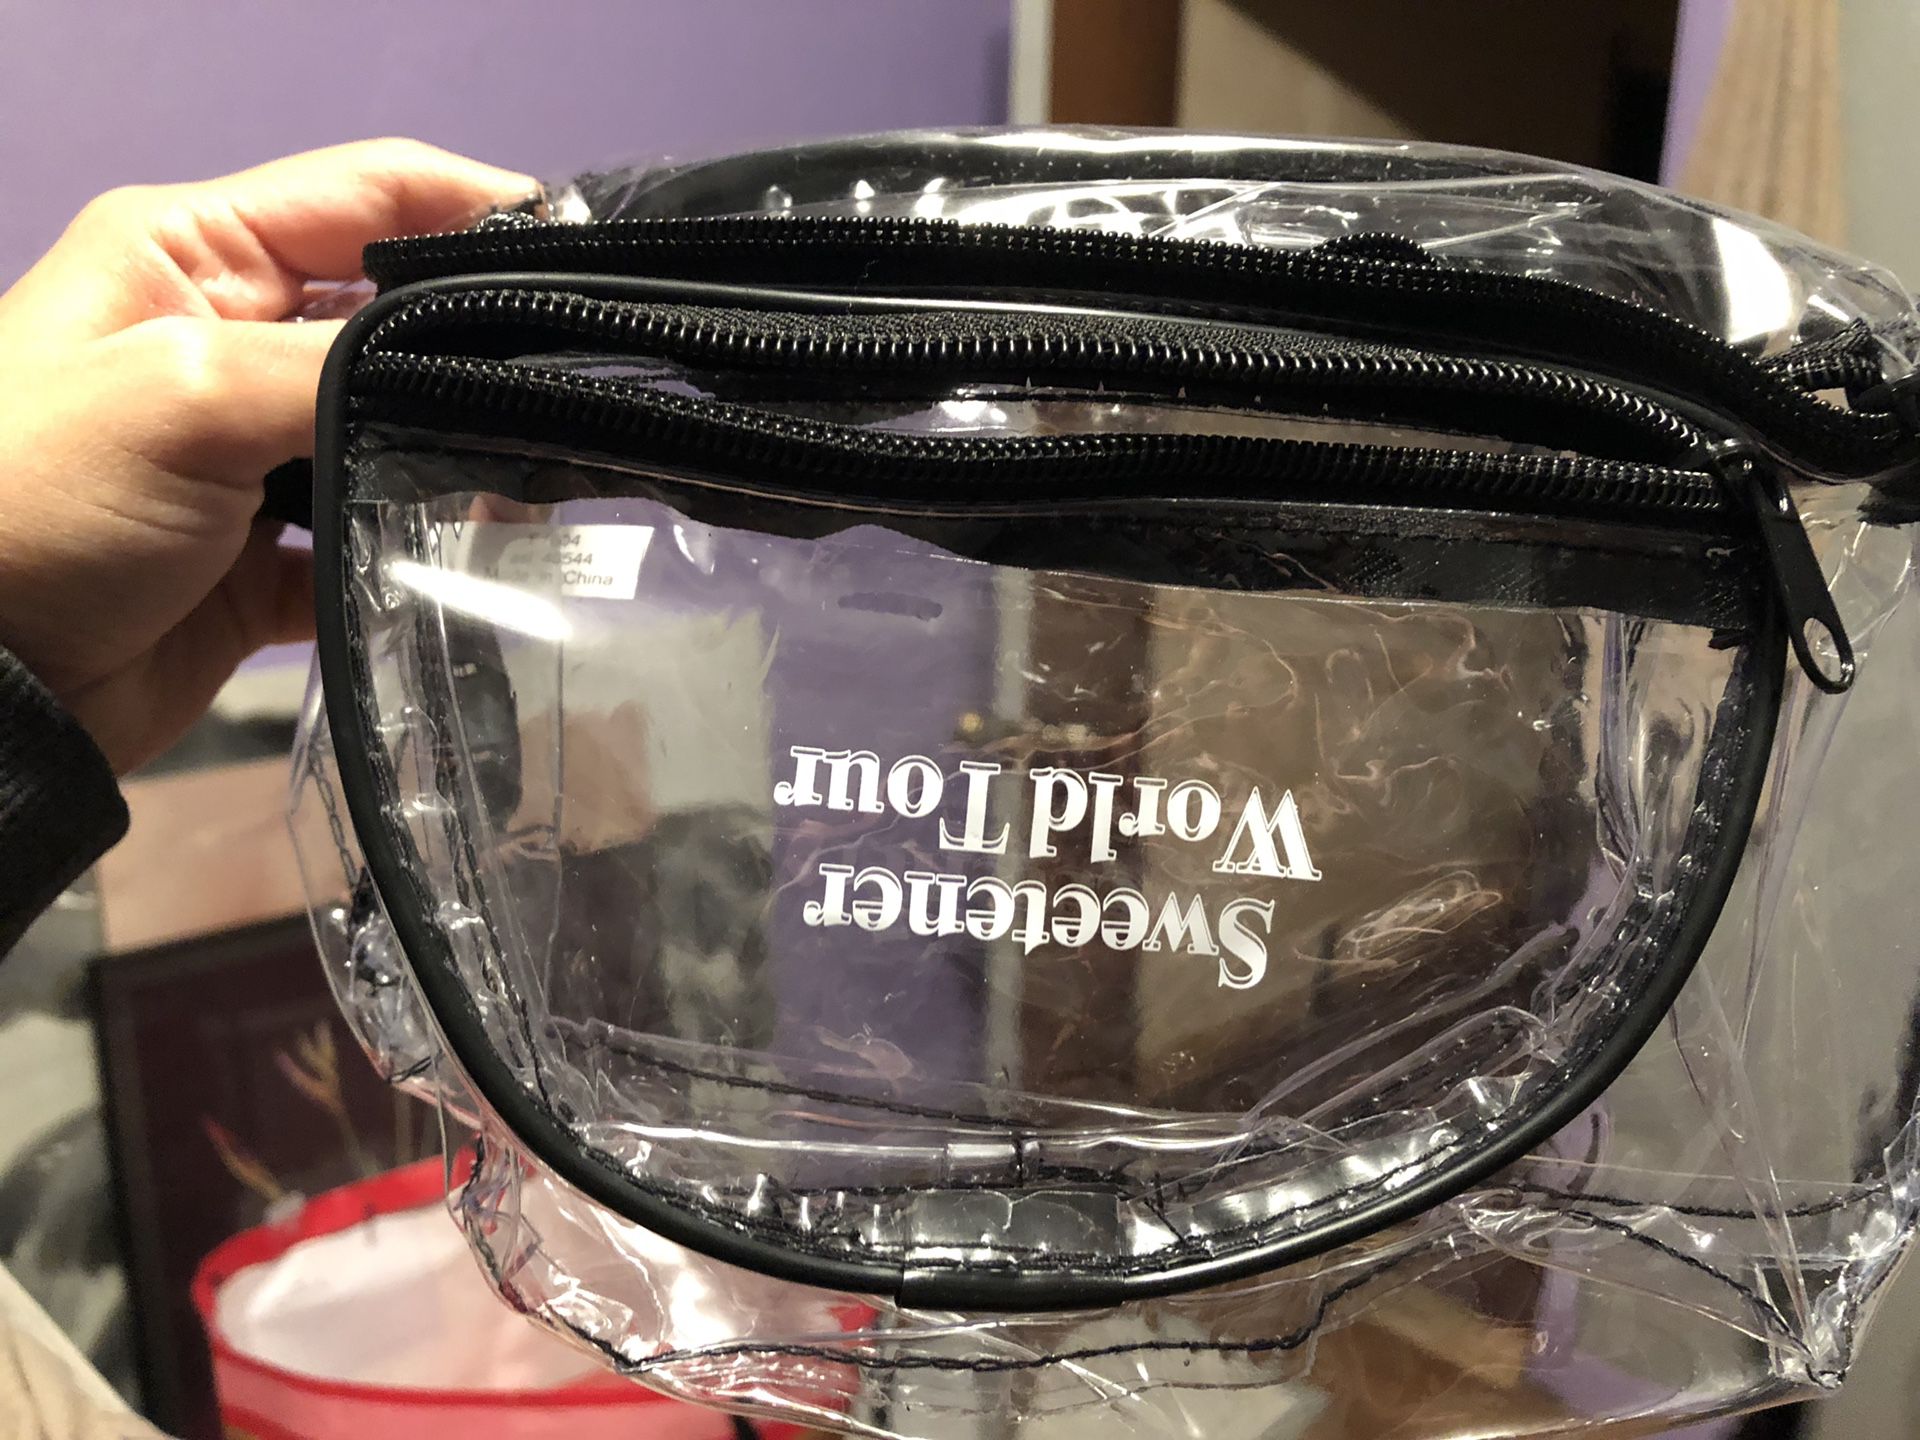 Ariana Grande Clear Fanny Pack for Sale in Coolidge, AZ - OfferUp